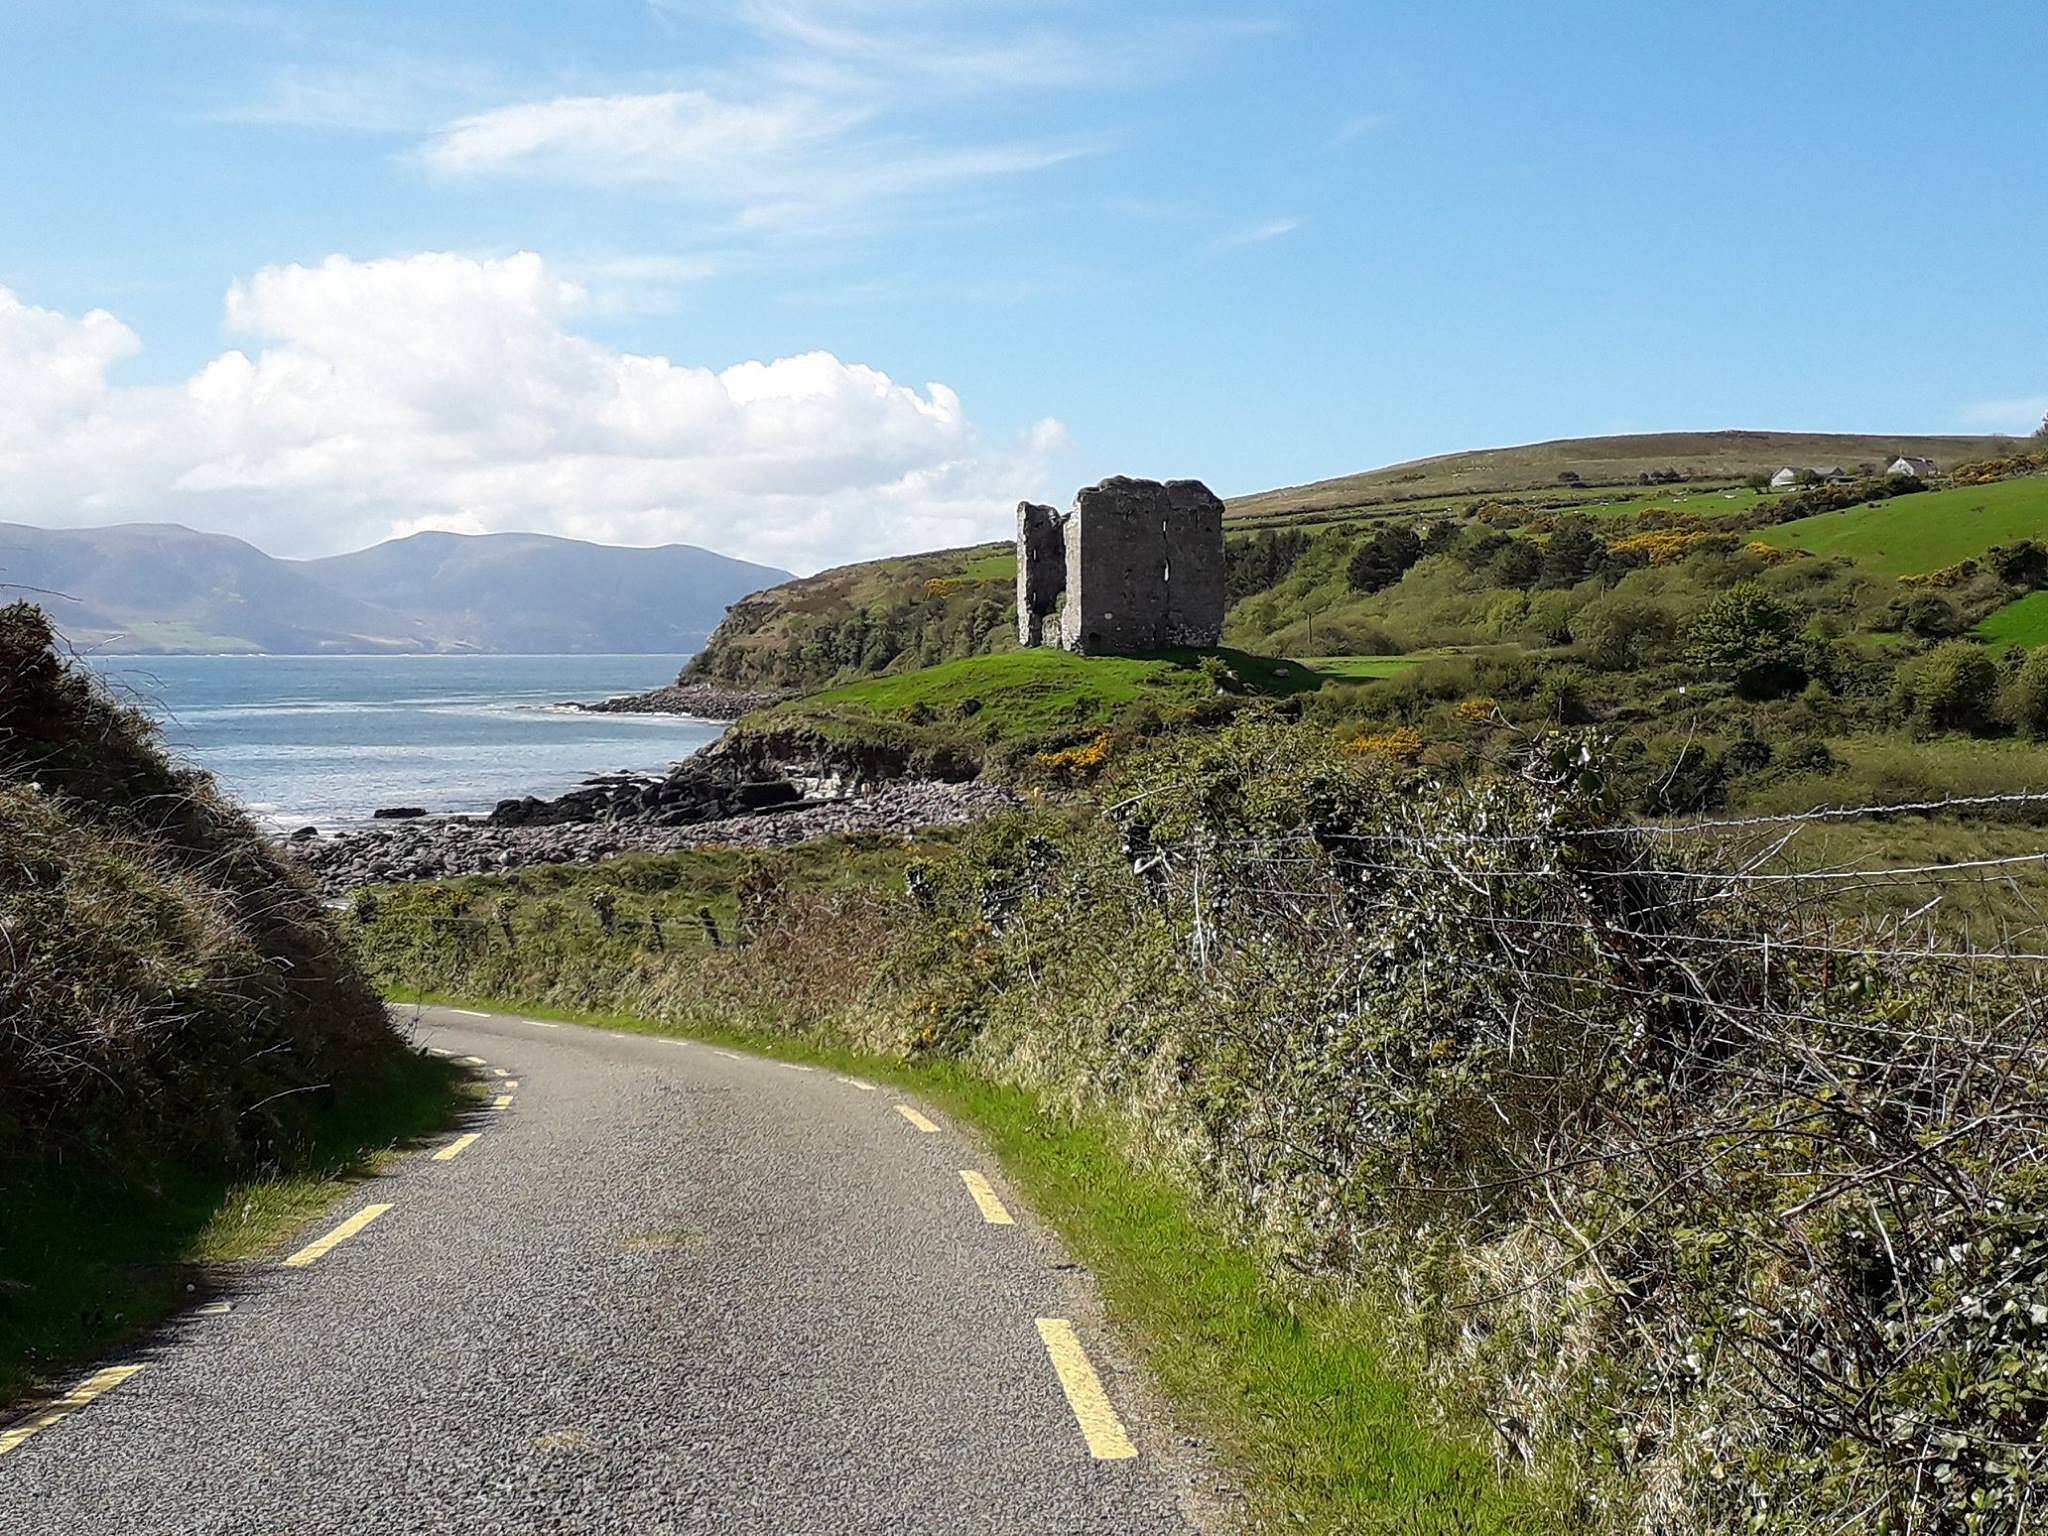 kerry experience tours